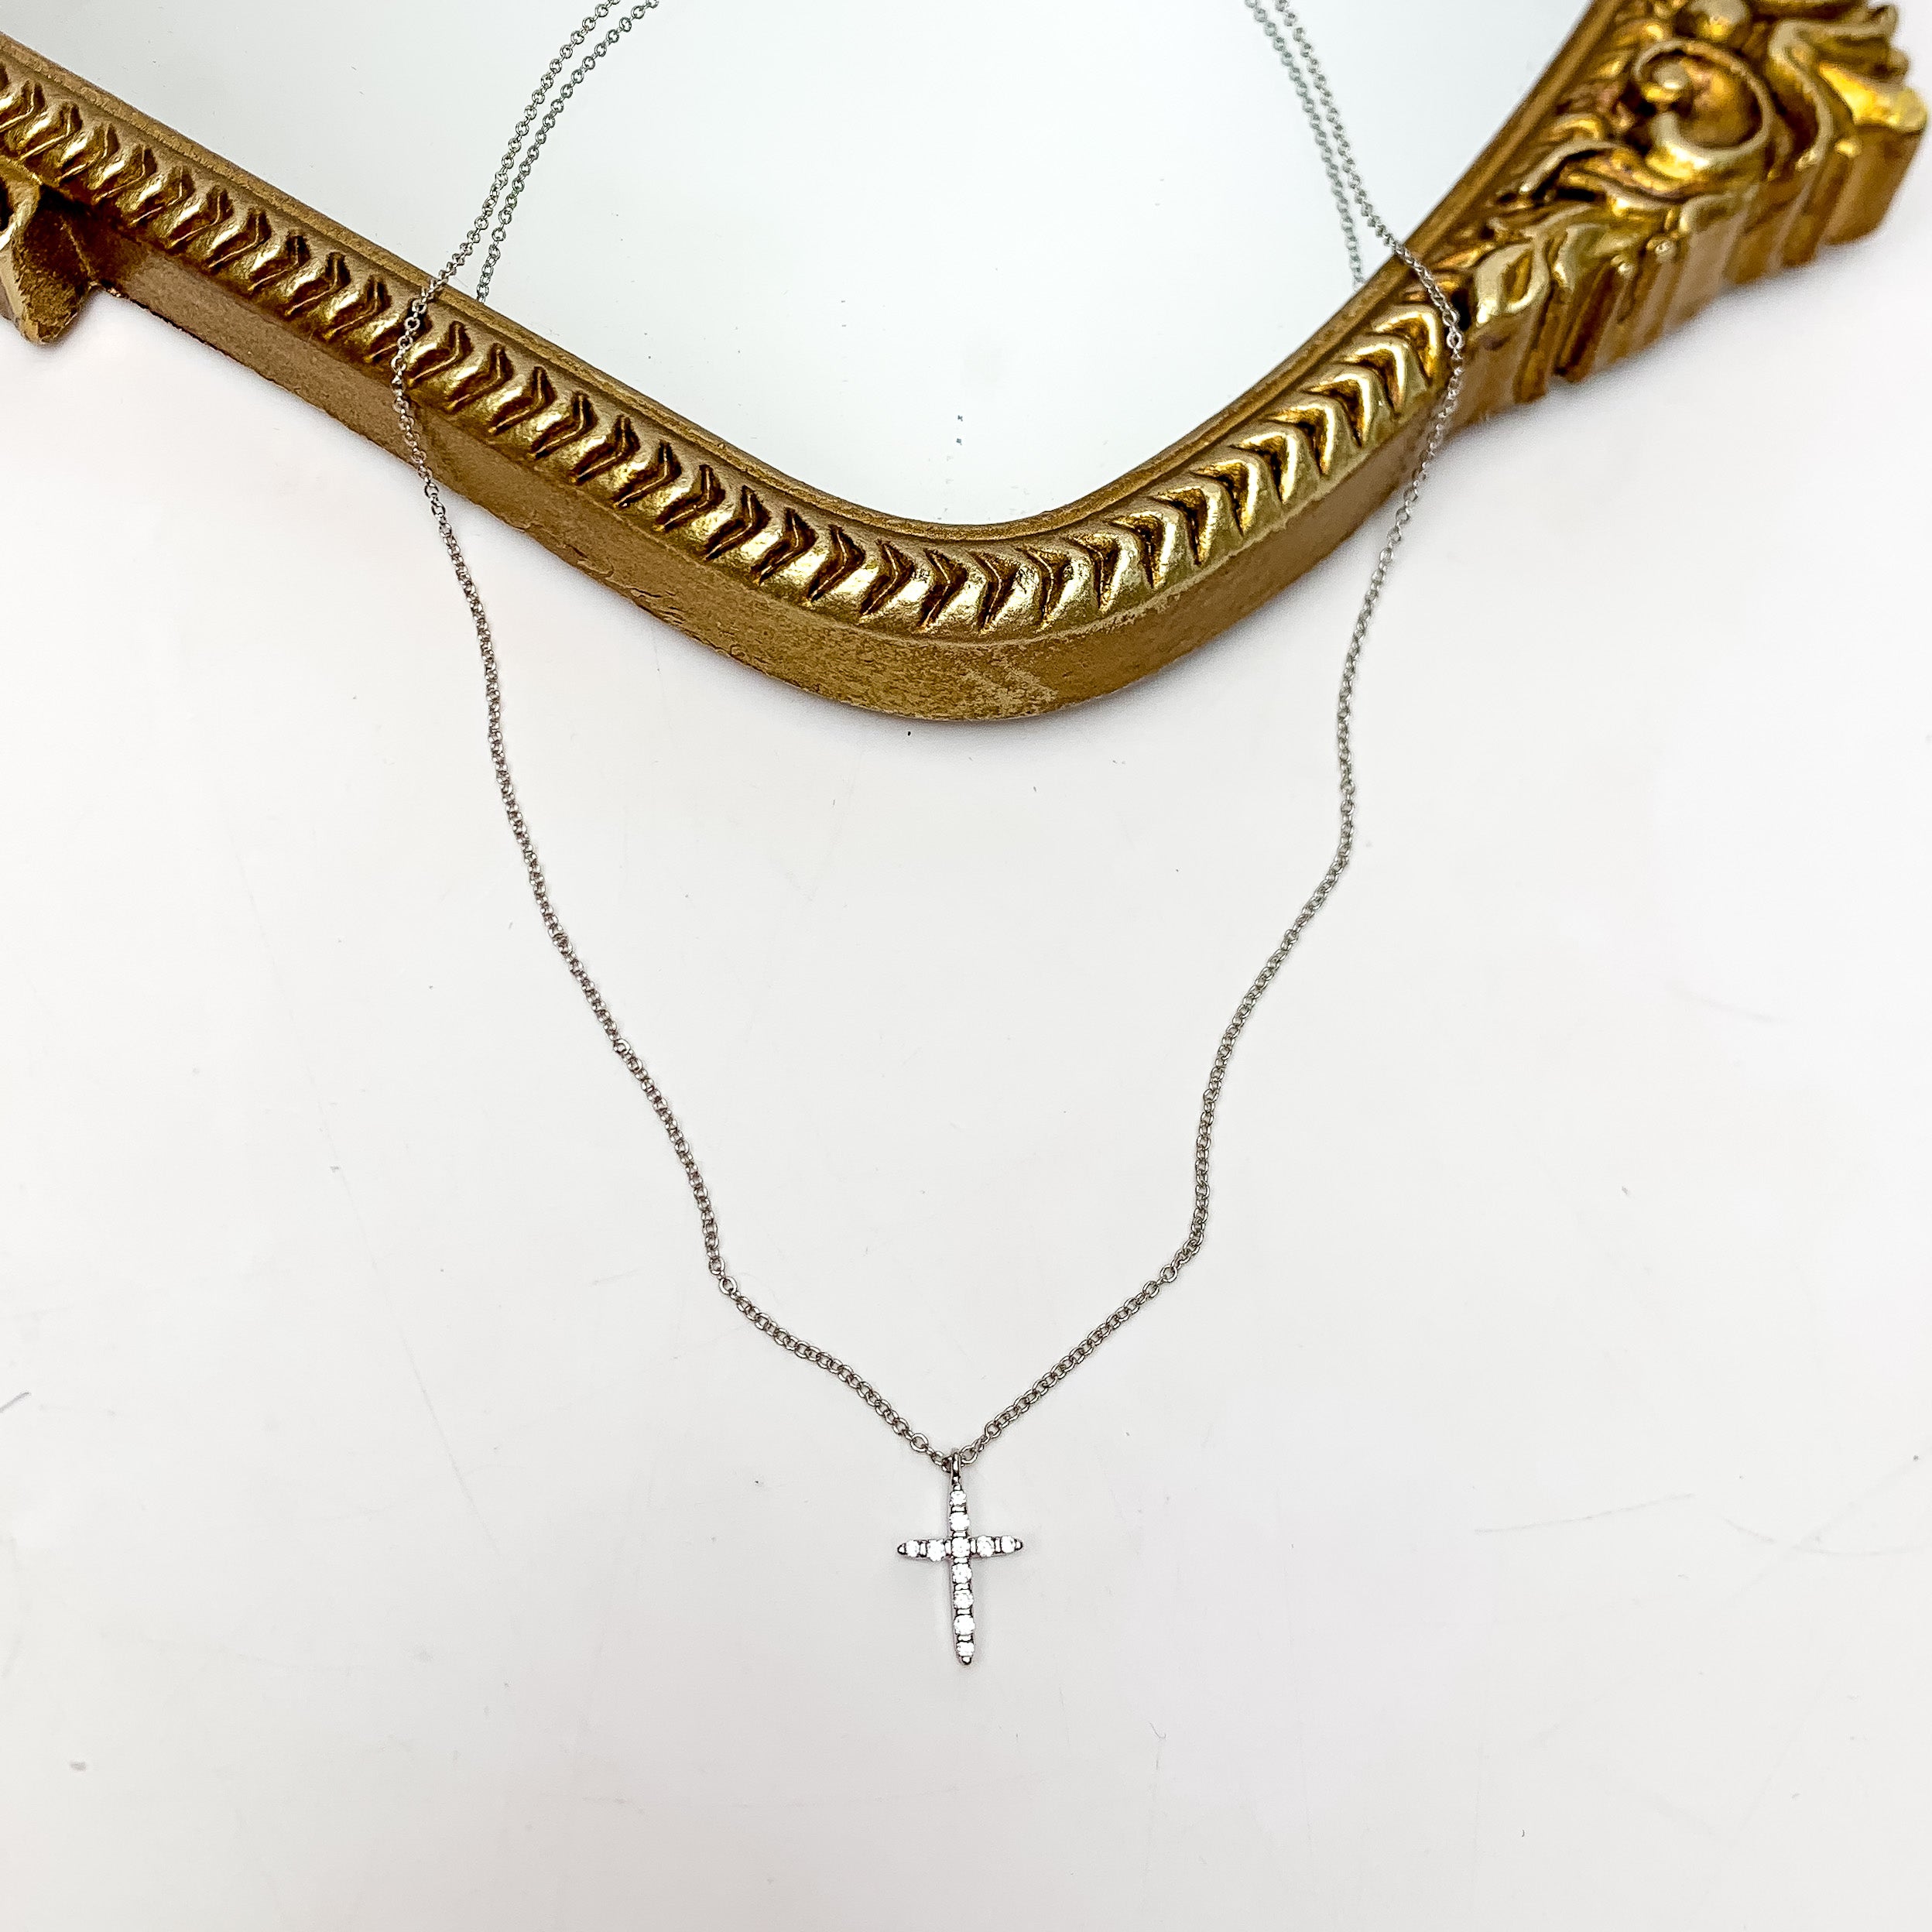 Silver Tone Glory Chain Necklace With Clear Crystal Cross. This necklace is pictured on a white background with part of it on a gold trimmed mirror.